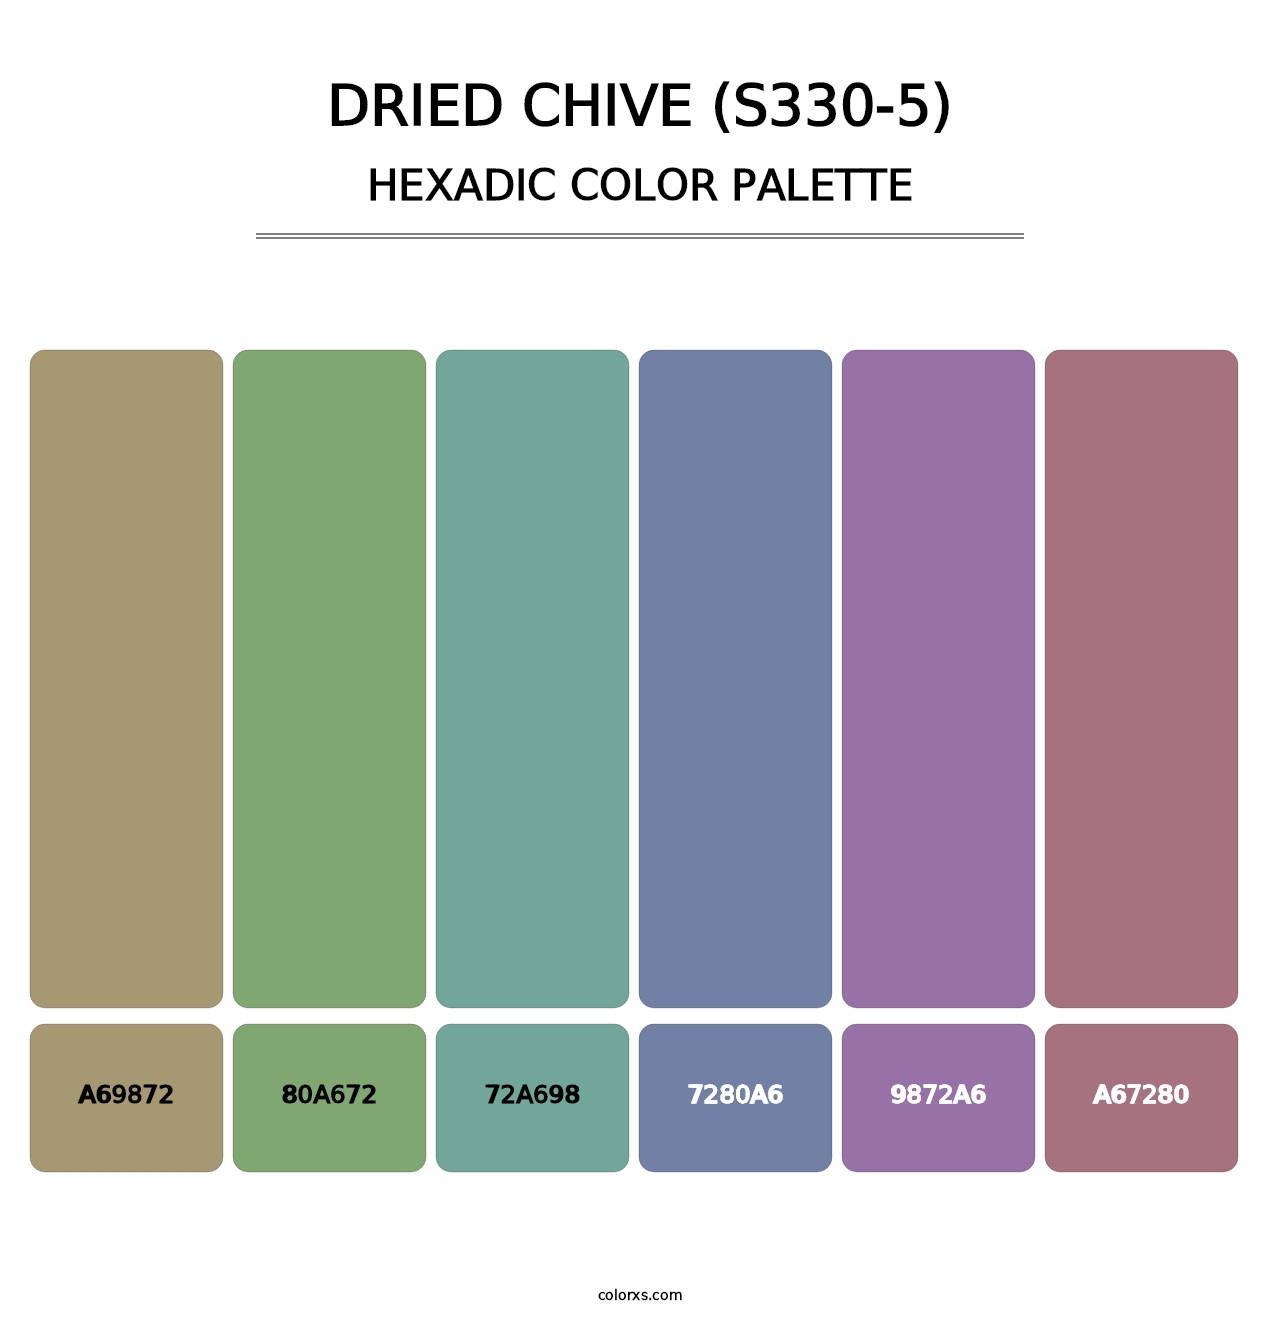 Dried Chive (S330-5) - Hexadic Color Palette